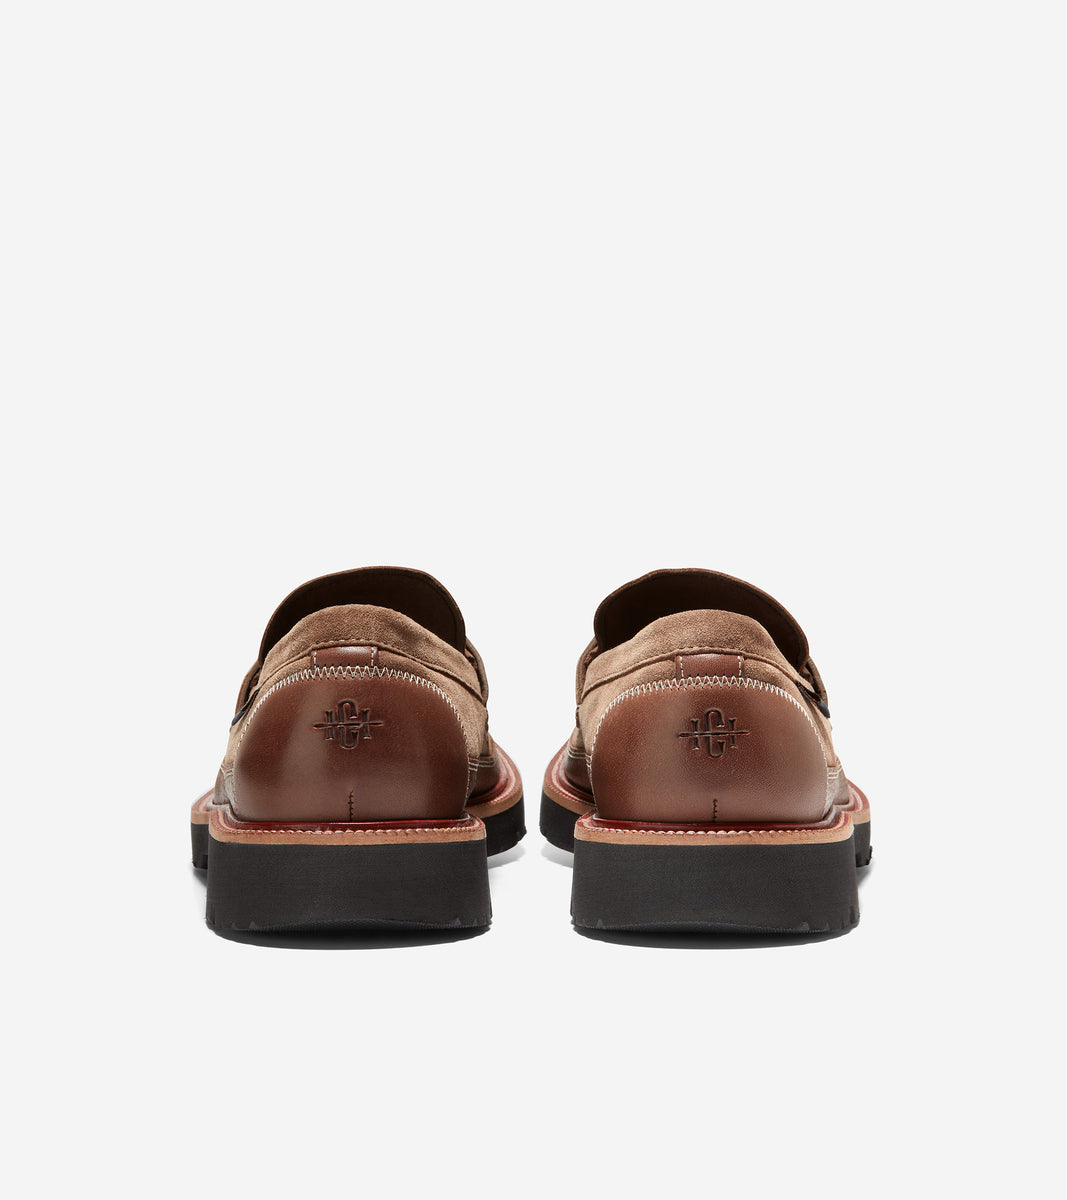 Cole Haan x Pendleton American Classics Penny Loafer